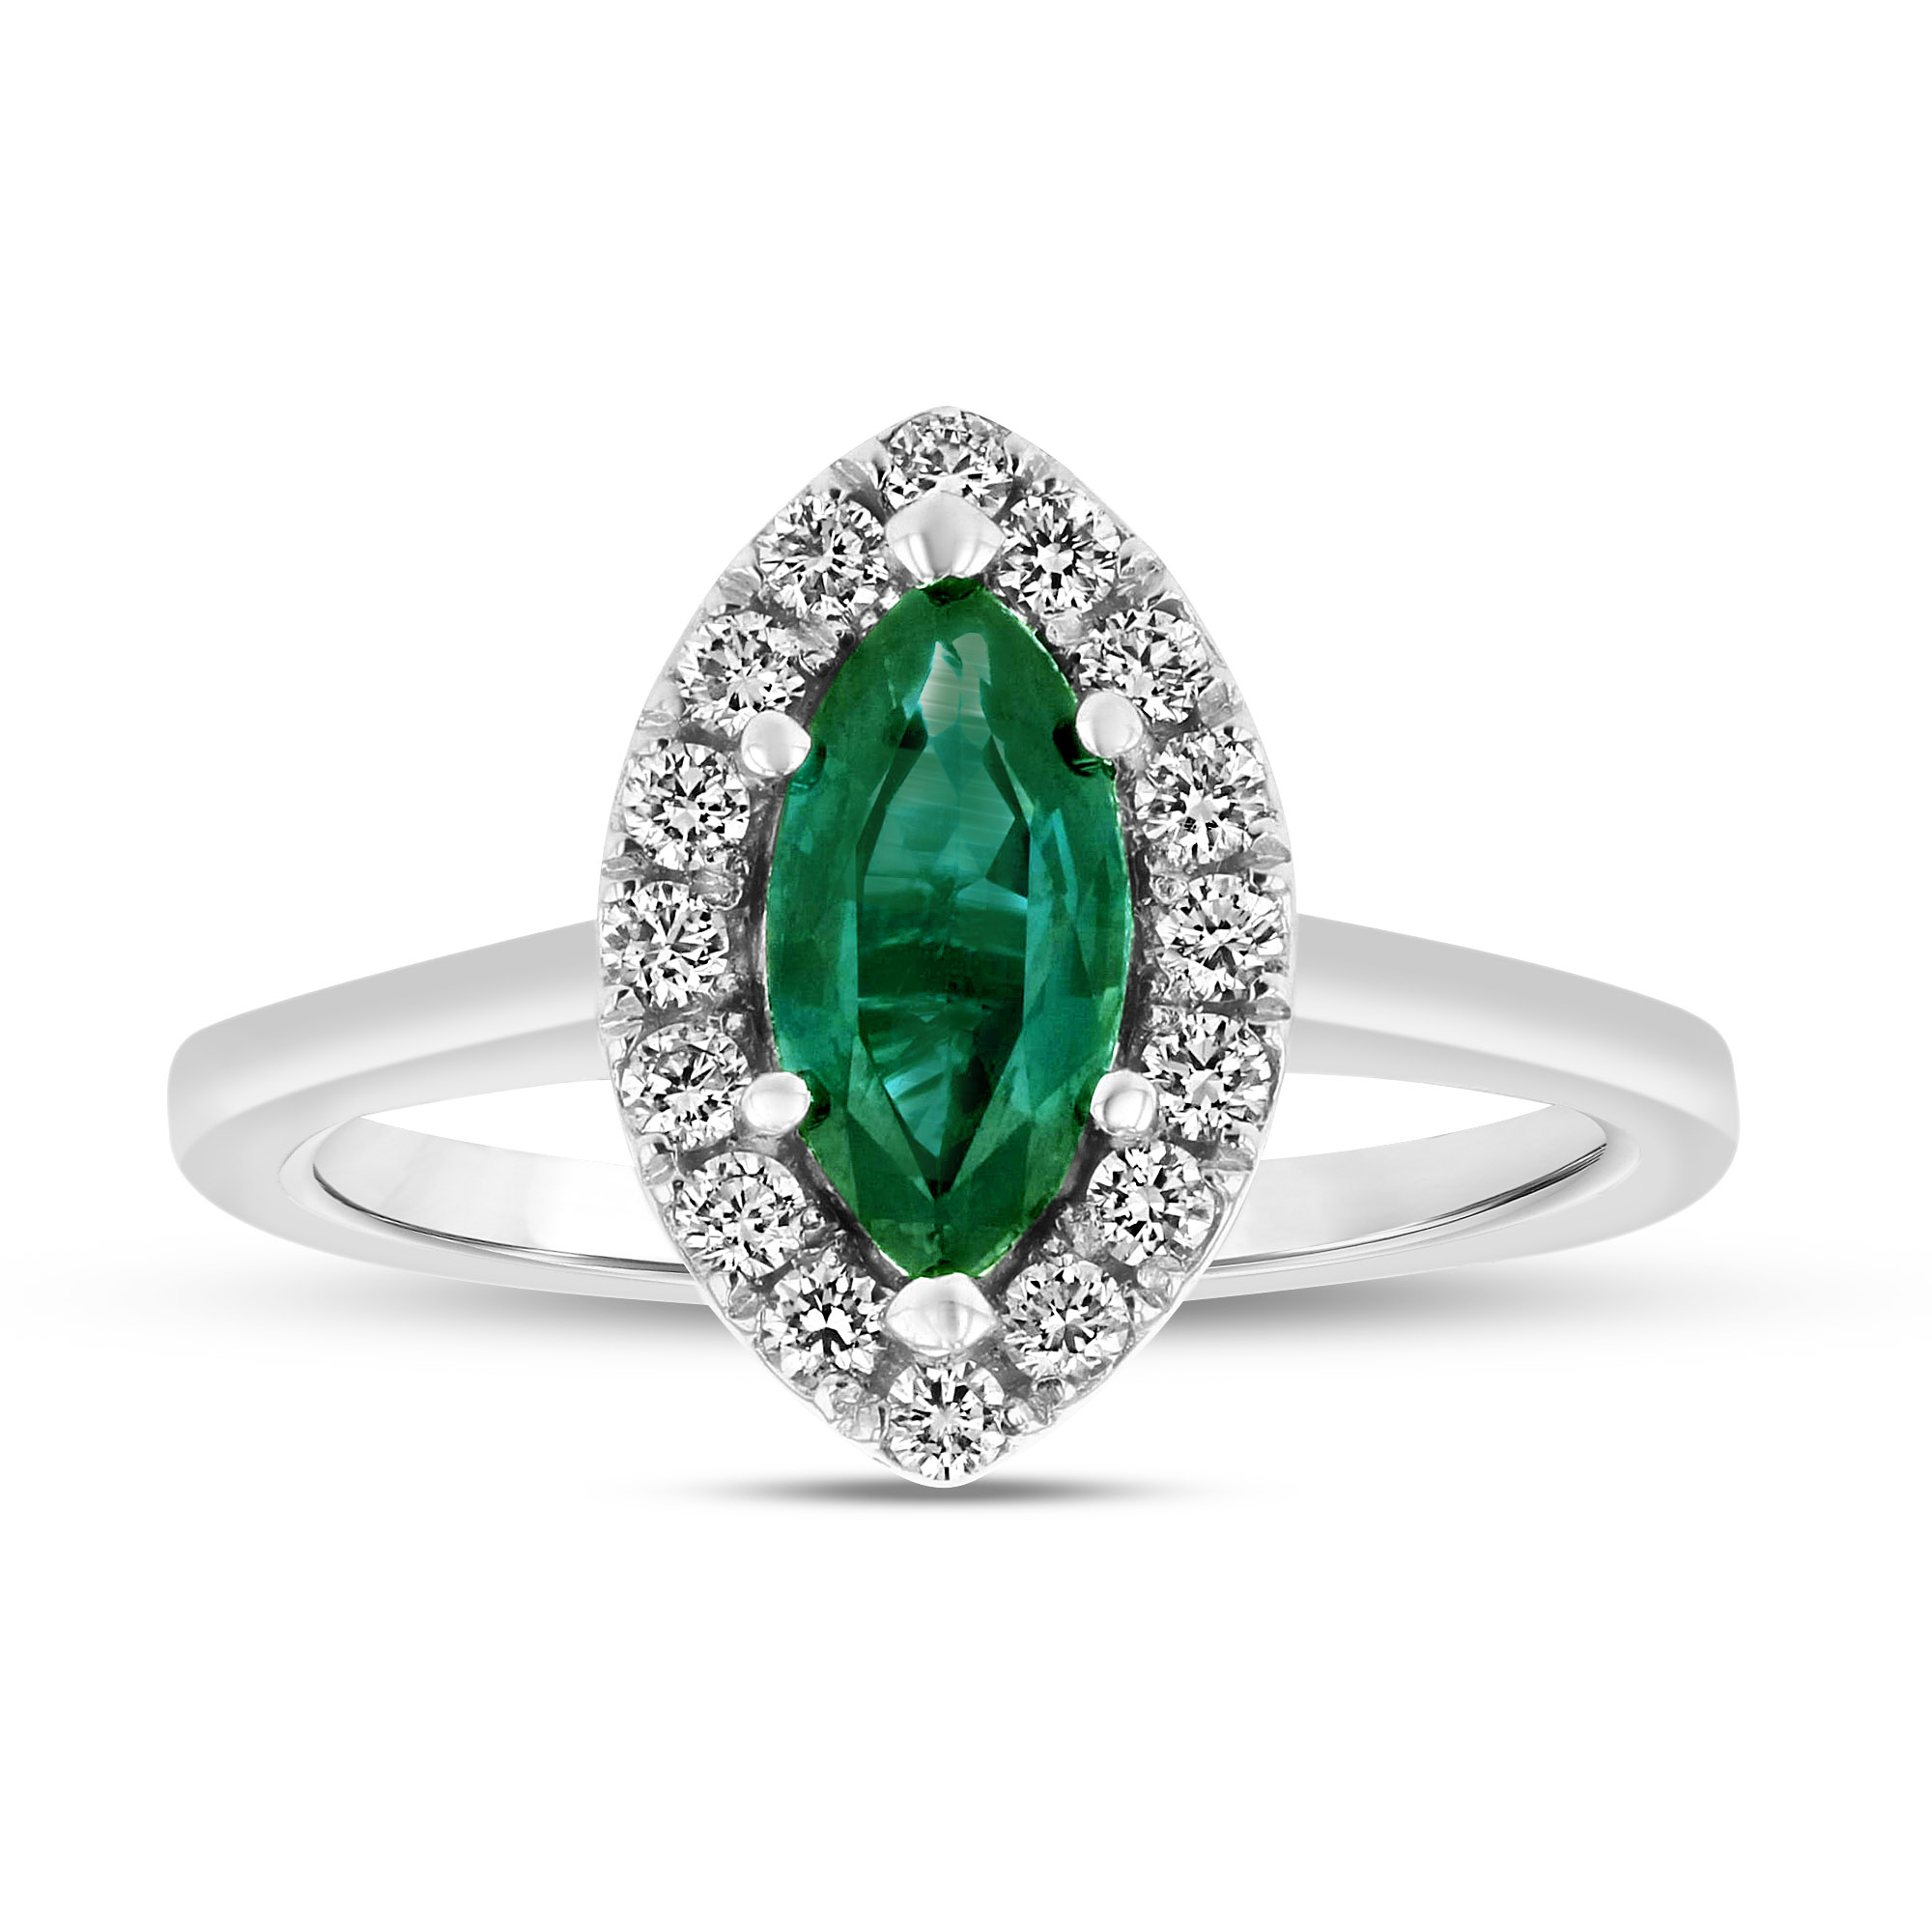 1.37ctw Diamond and Emerald Ring in 14k White Gold